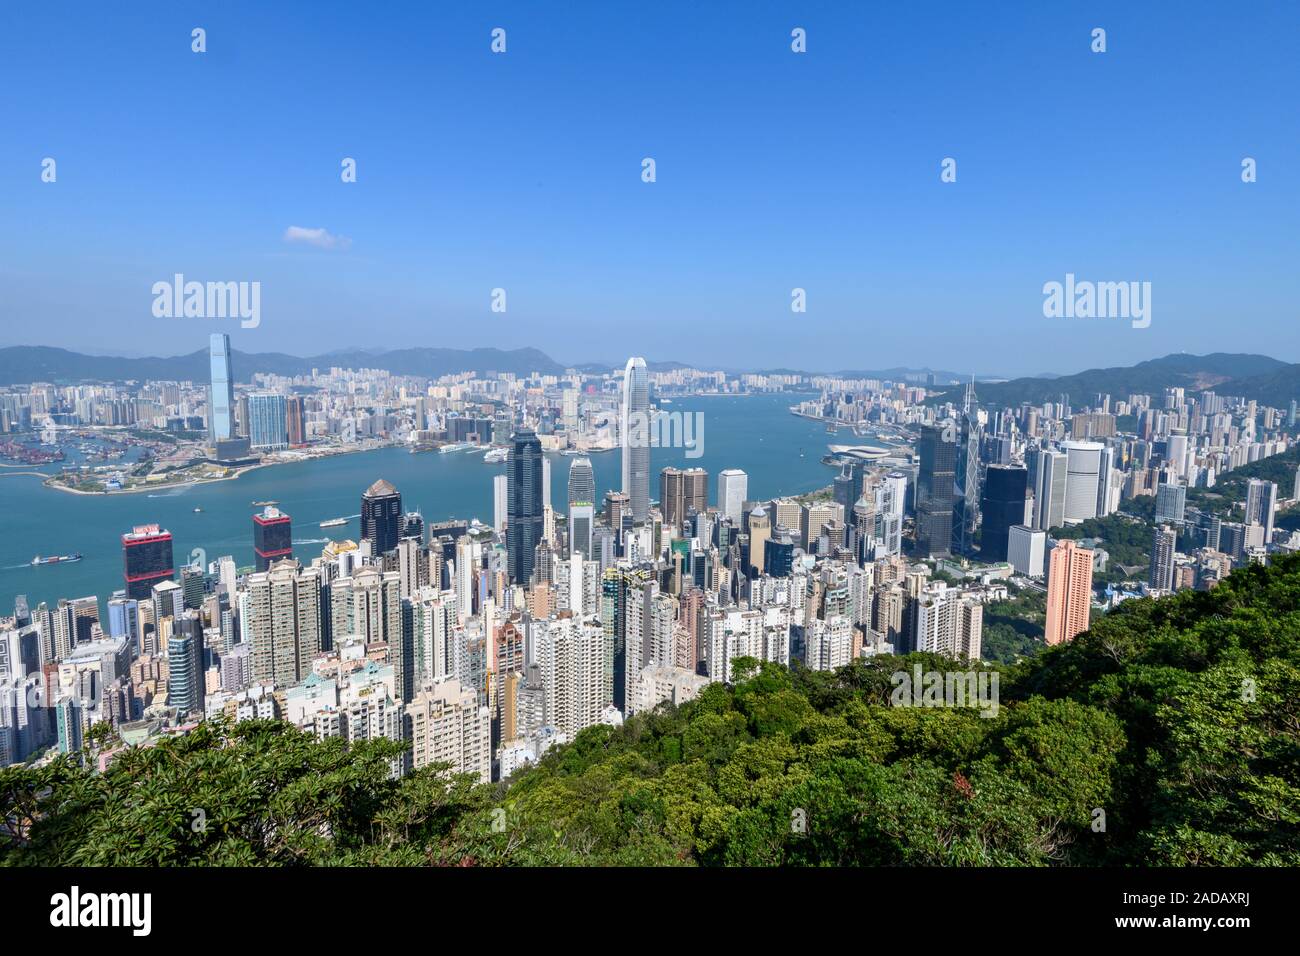 Hong Kong skyline and Victoria Harbour as seen from the Peak during the day. Stock Photo